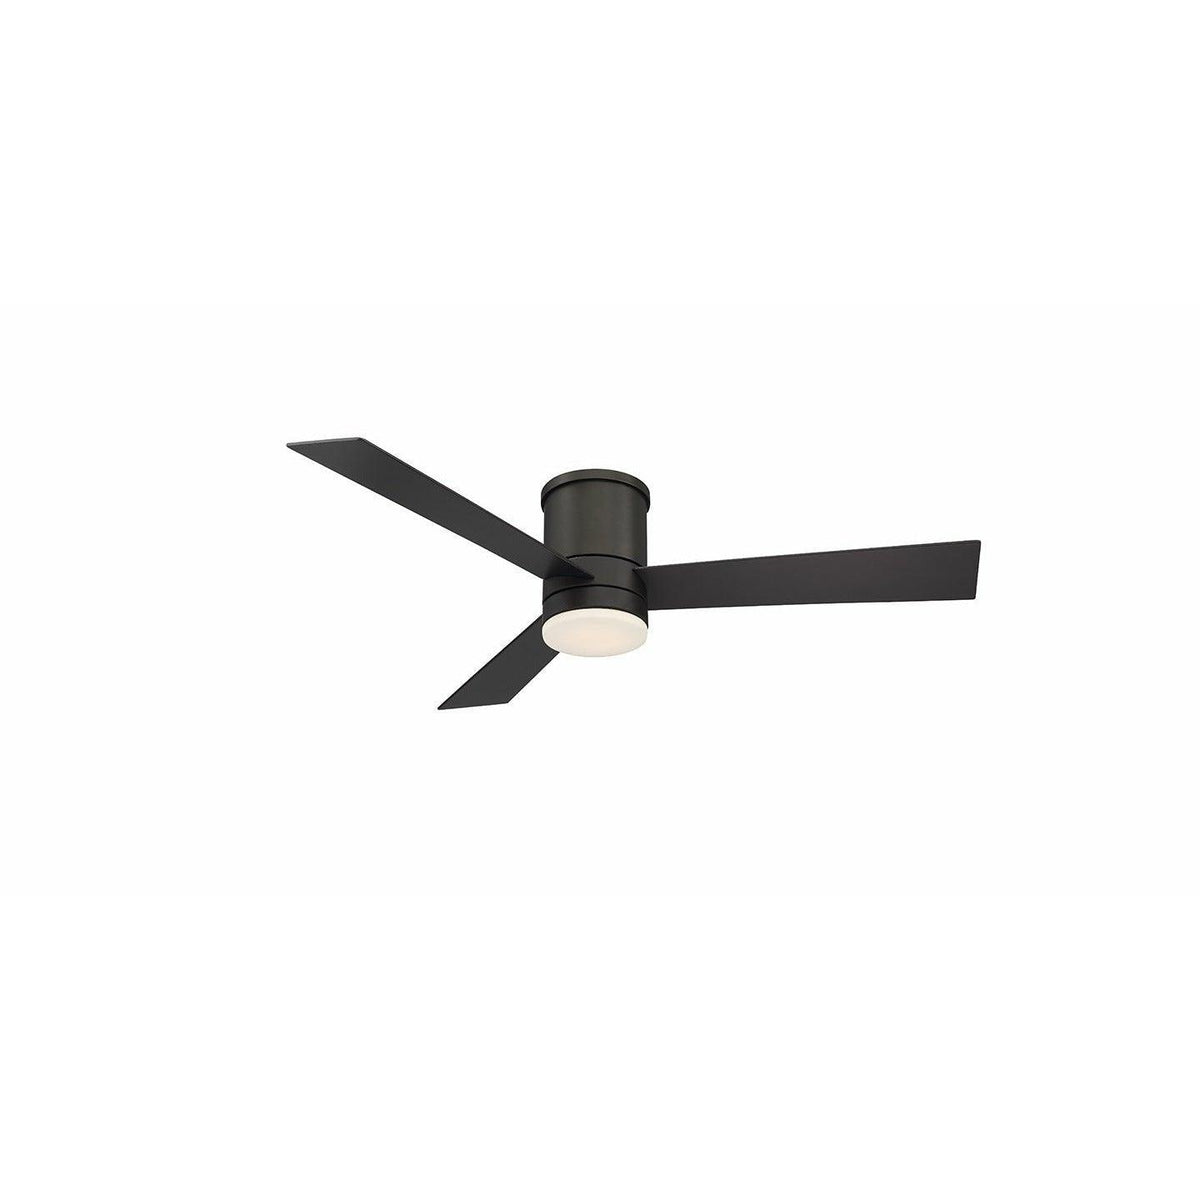 Modern Forms - Axis Flush Ceiling Fan - FH-W1803-52L-35-BZ | Montreal Lighting & Hardware